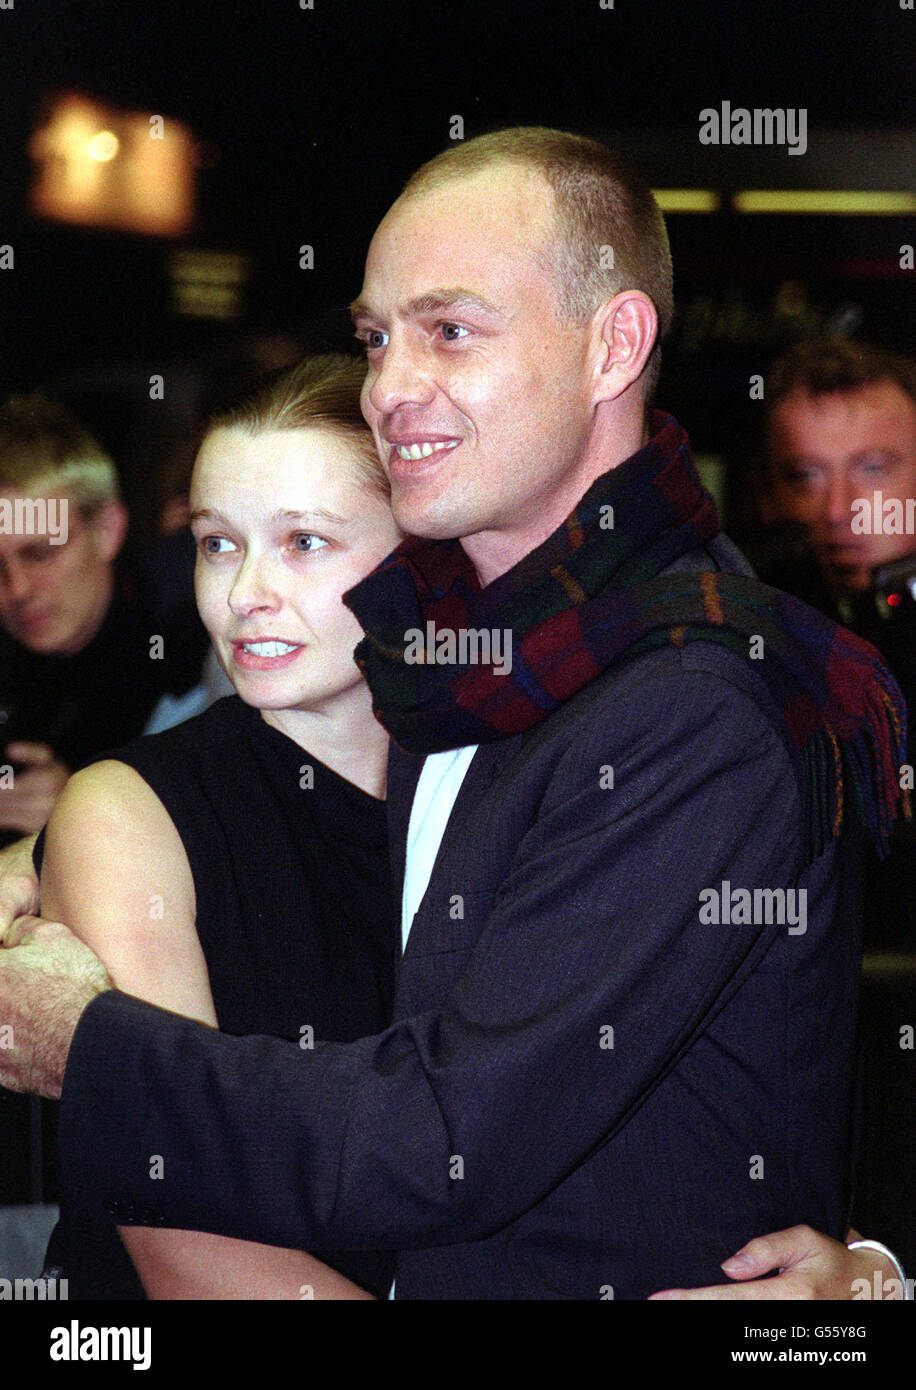 Former Neighbours star, actor and singer Jason Donovan, who stars in the film, and his girlfriend Angela Malloch arriving for the premiere of 'Sorted', at the ABC cinema in London's Shaftsbury Avenue. Stock Photo